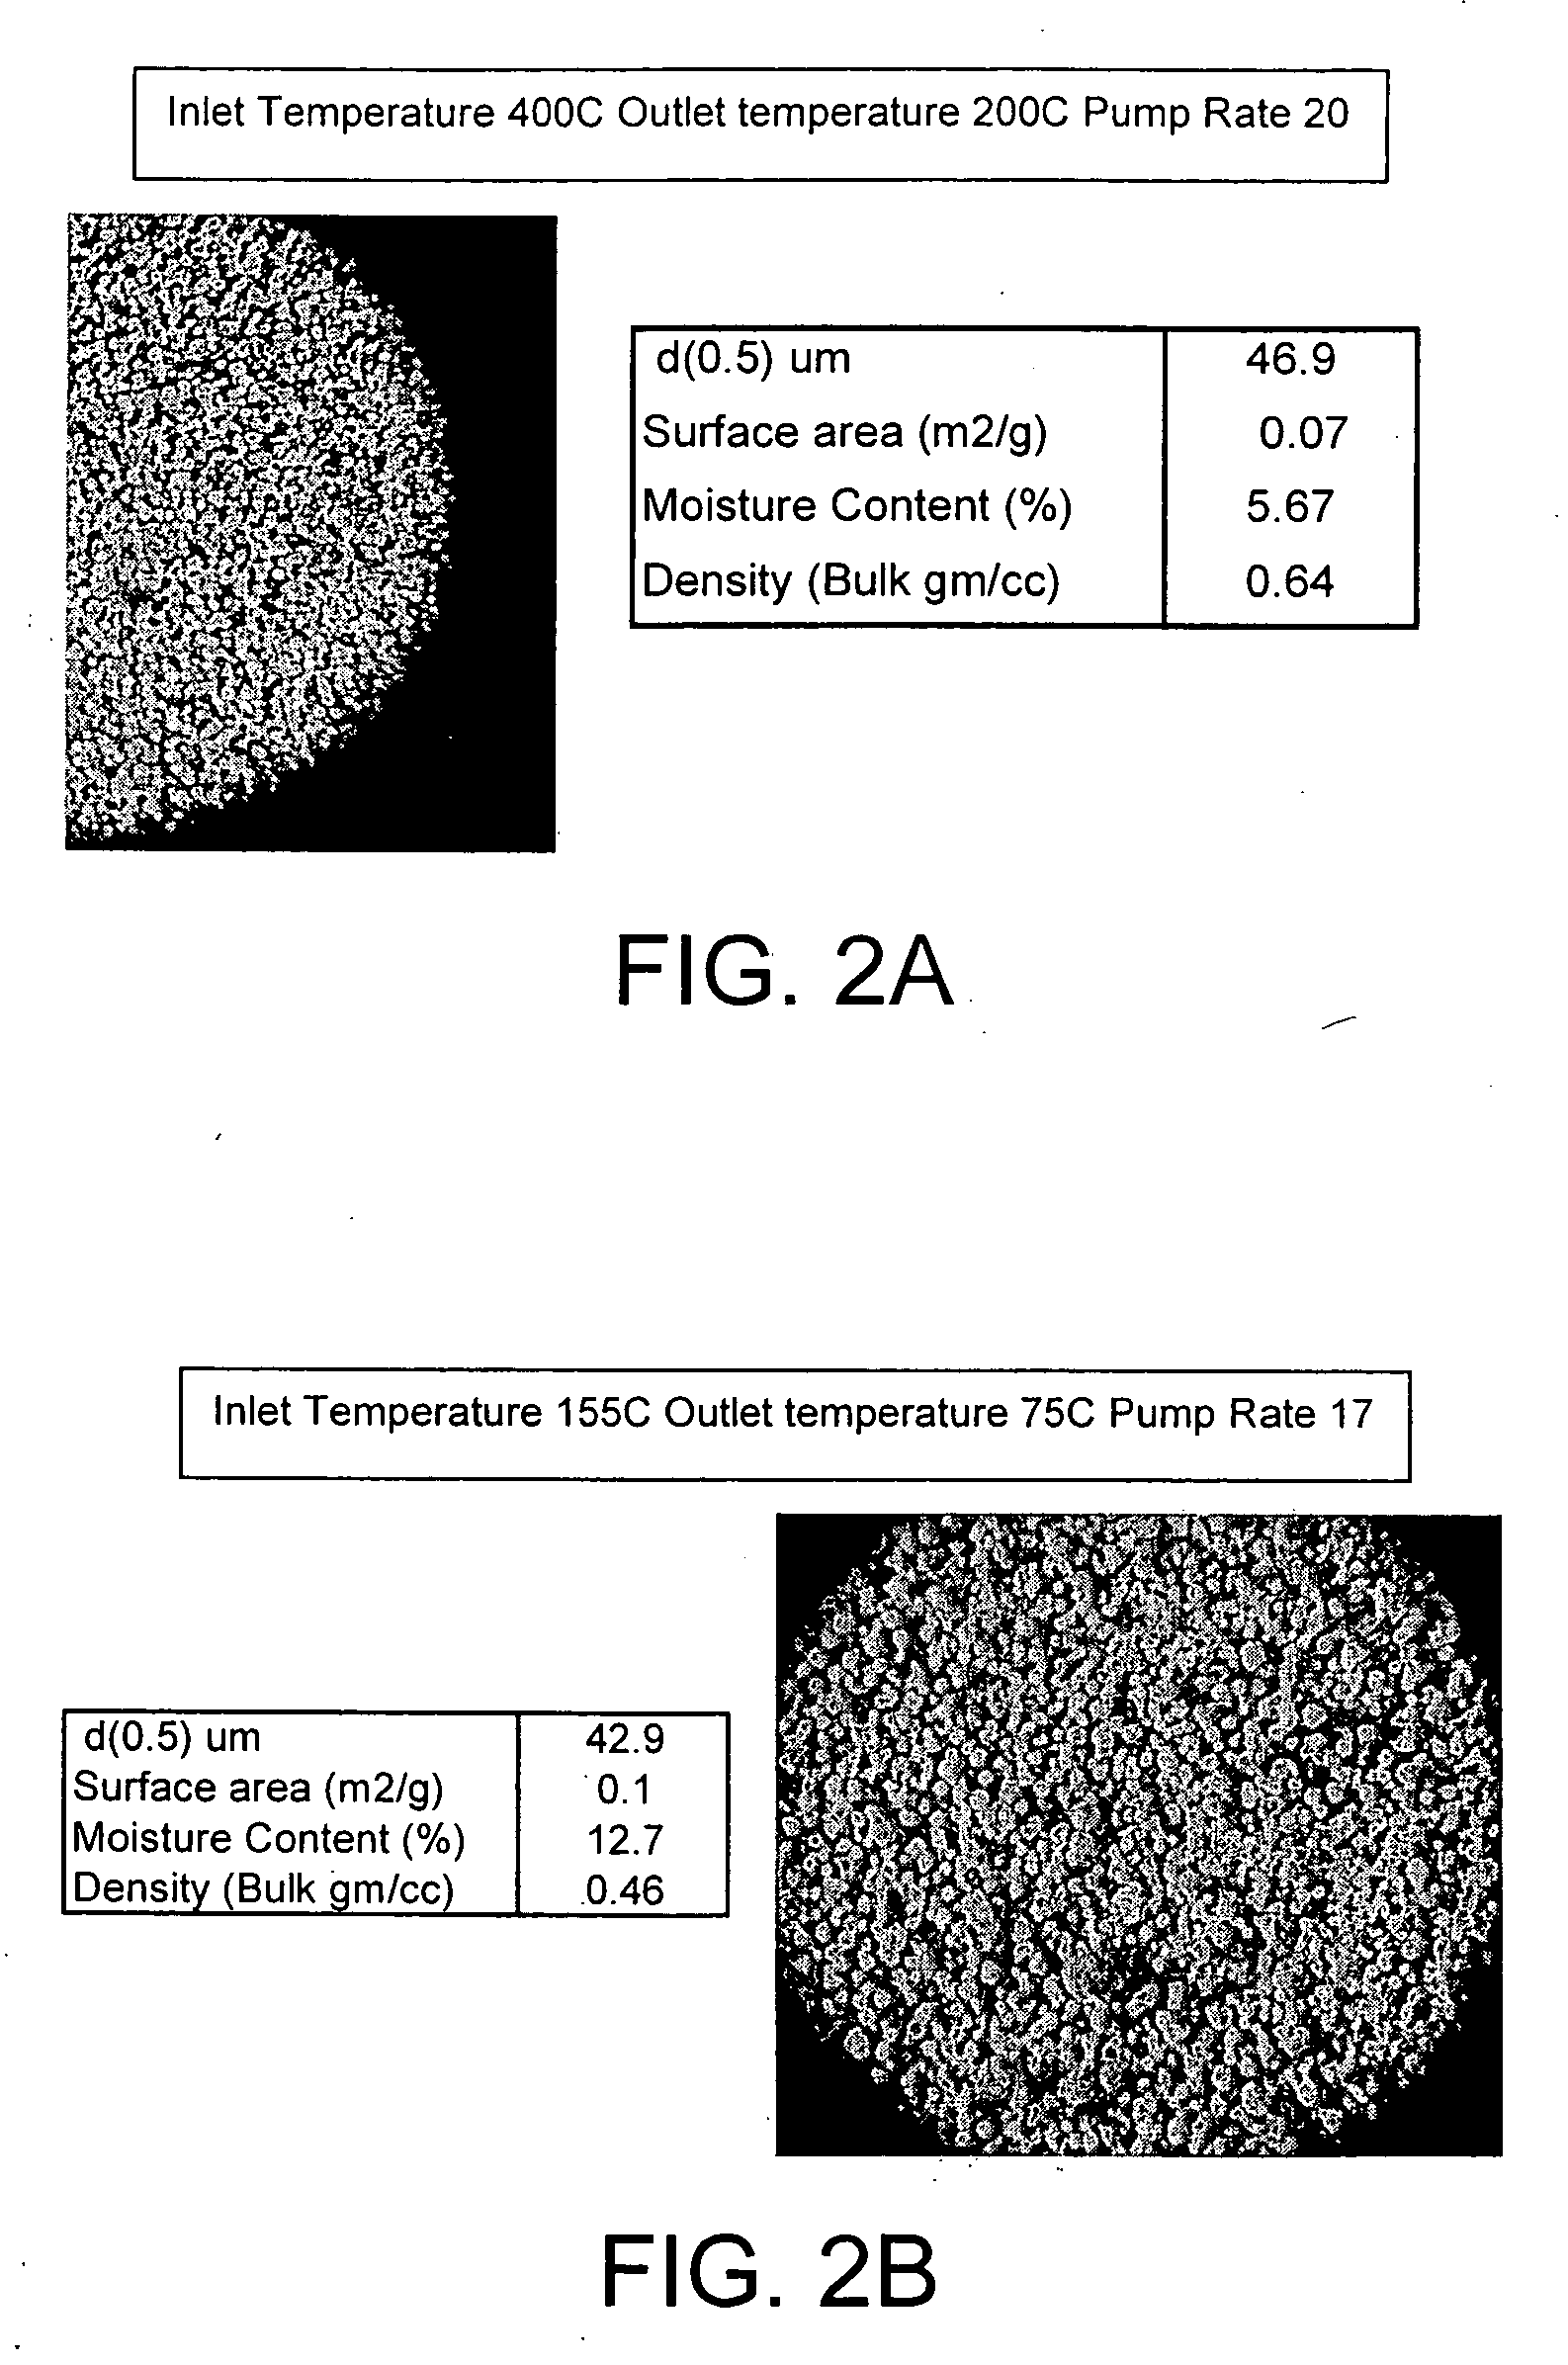 Multi-function composition for settable composite materials and methods of making the composition